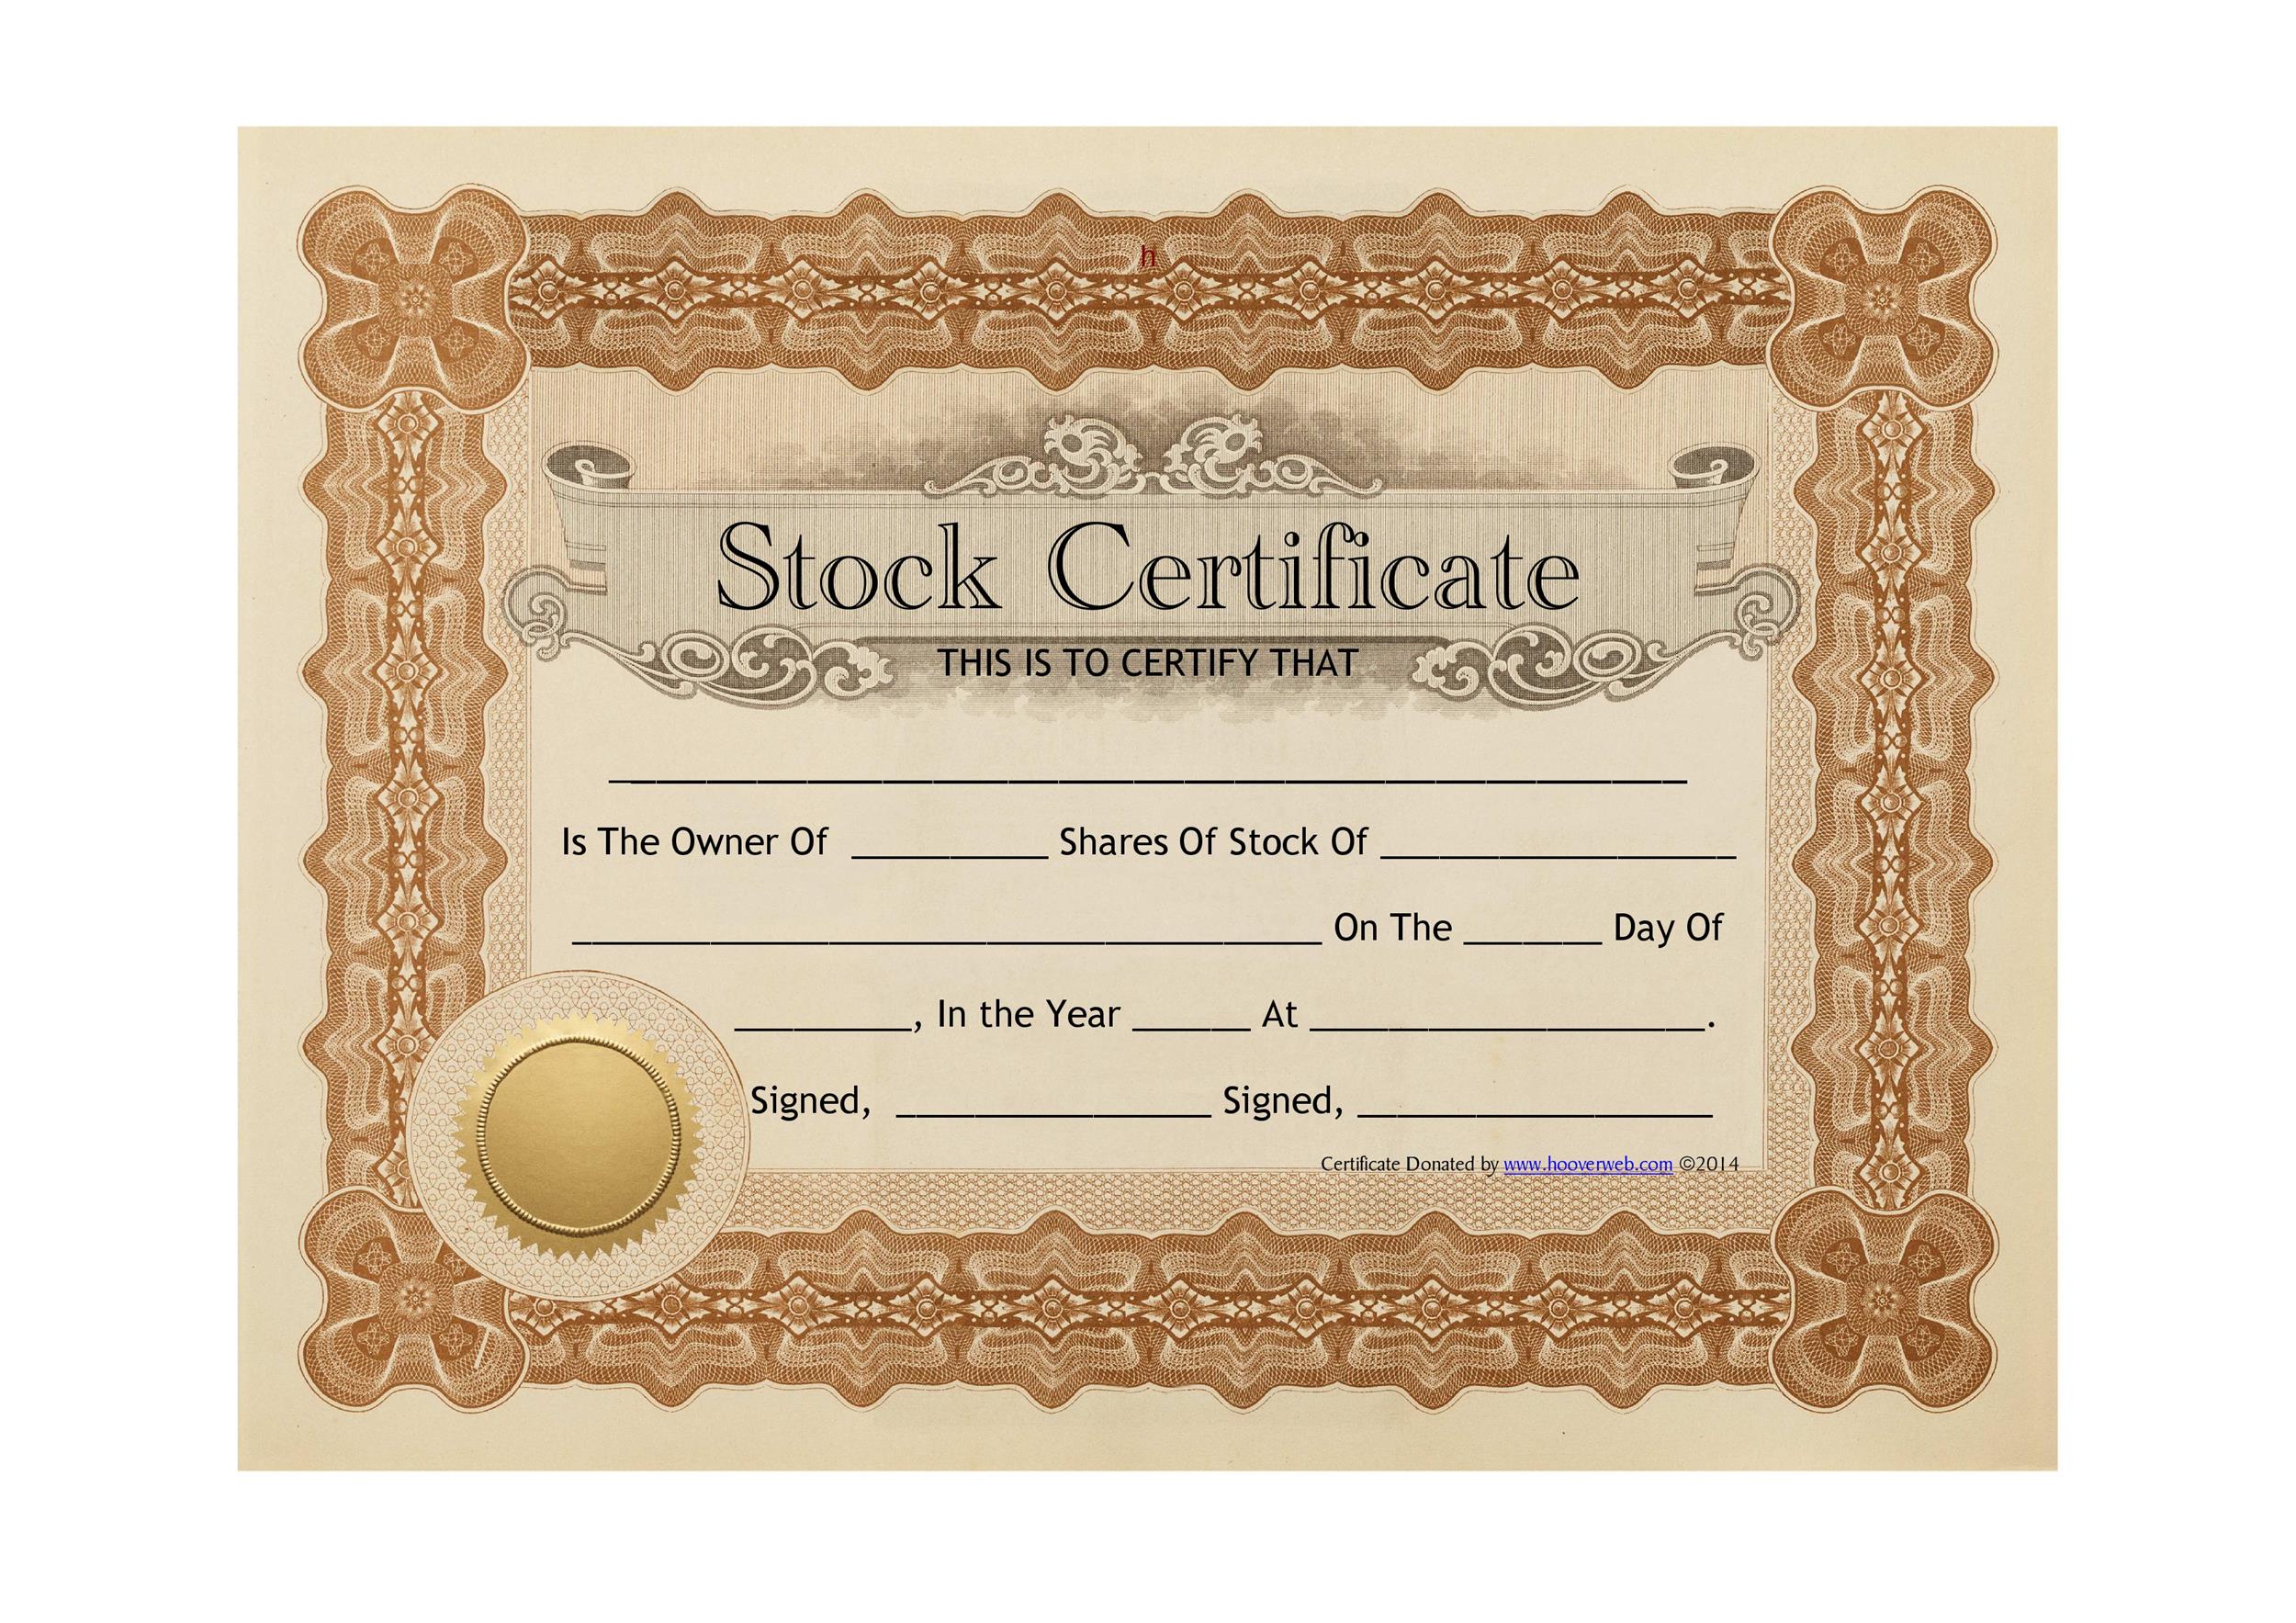 Share Certificate Templates 12+ Free Word, Excel & PDF Formats